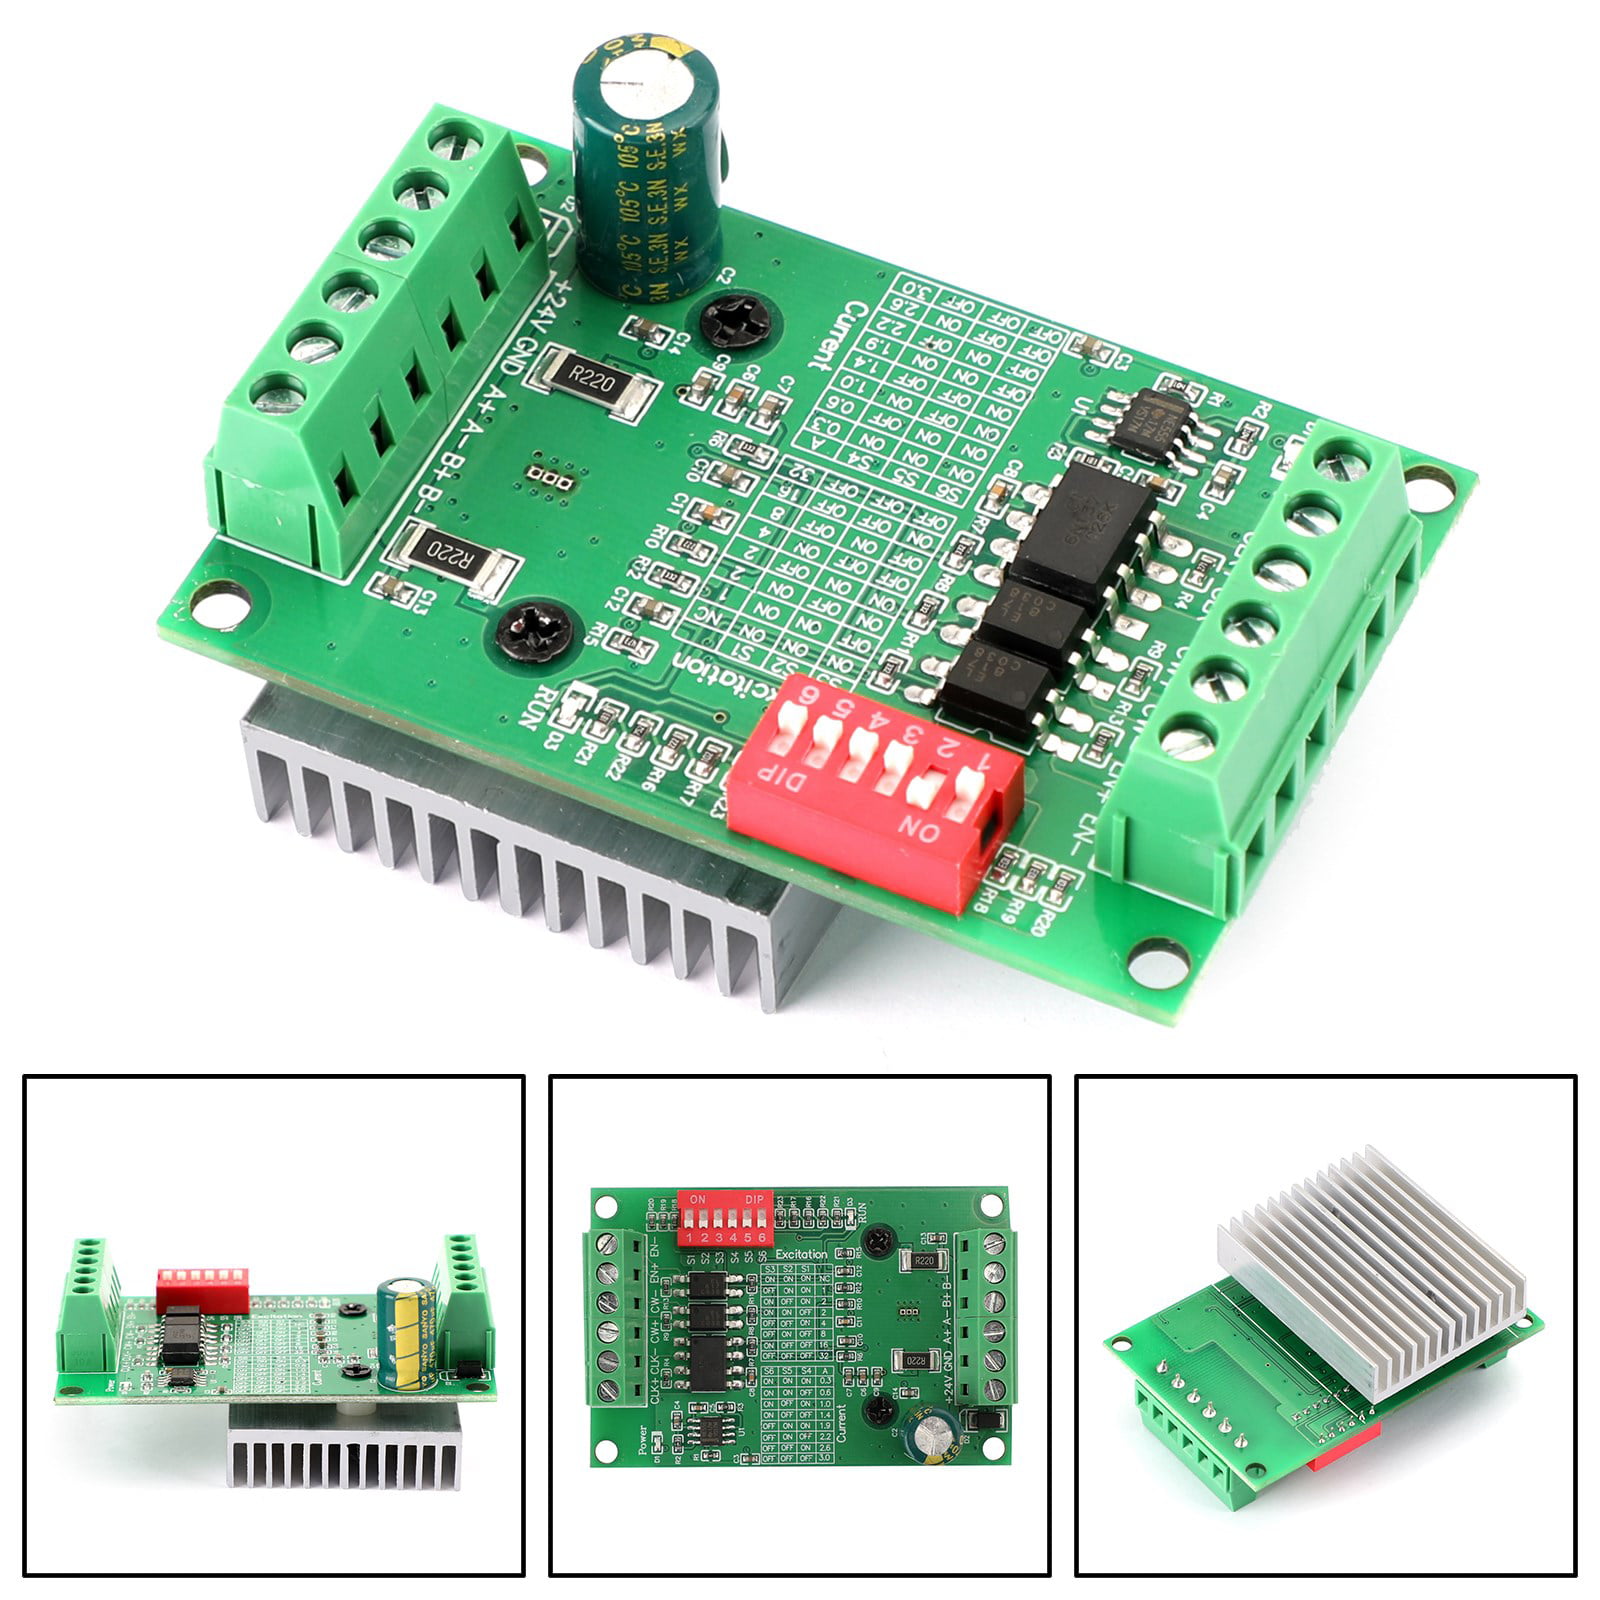 1PCS Single Axis TB6560 3.5A 2 Phase CNC Stepper Motor Driver Board Controller 